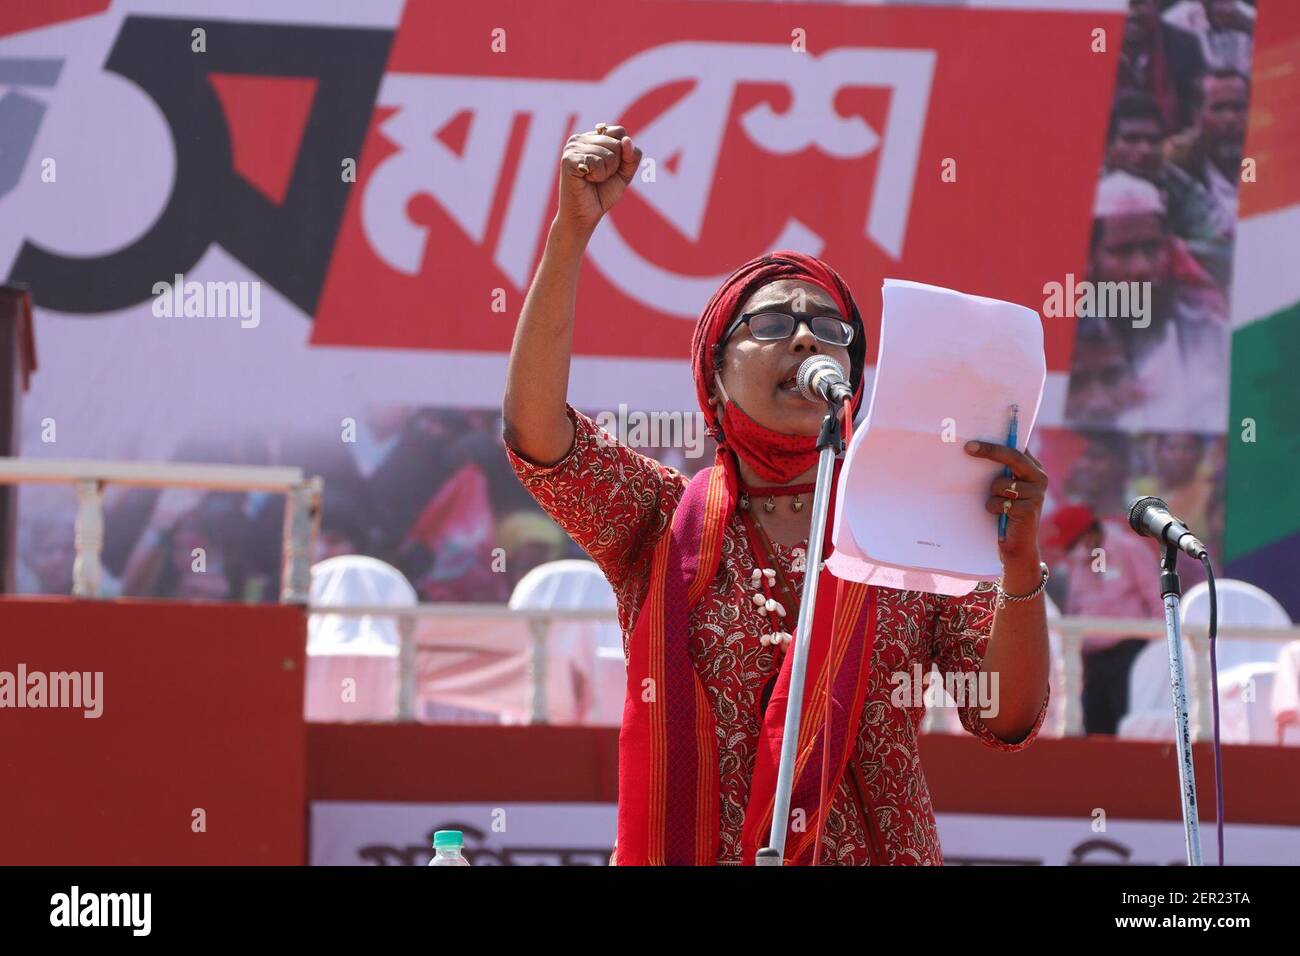 Calcutta, India. 28th Feb, 2021. The stage of the brigade has been set up. Young Generation singing, 'We shall over come.'Leftists on the brigade ground holding the hand of the Congress for the first time, targeting the state assembly vote. Abbas Siddiqui's alliance with the Indian Secular Front (ISF) is still unresolved. But for the time being the ISF has shared the brigade's platform with the Left and the Congress. (Photo by Anubrata Mondal/Pacific Press) Credit: Pacific Press Media Production Corp./Alamy Live News Stock Photo